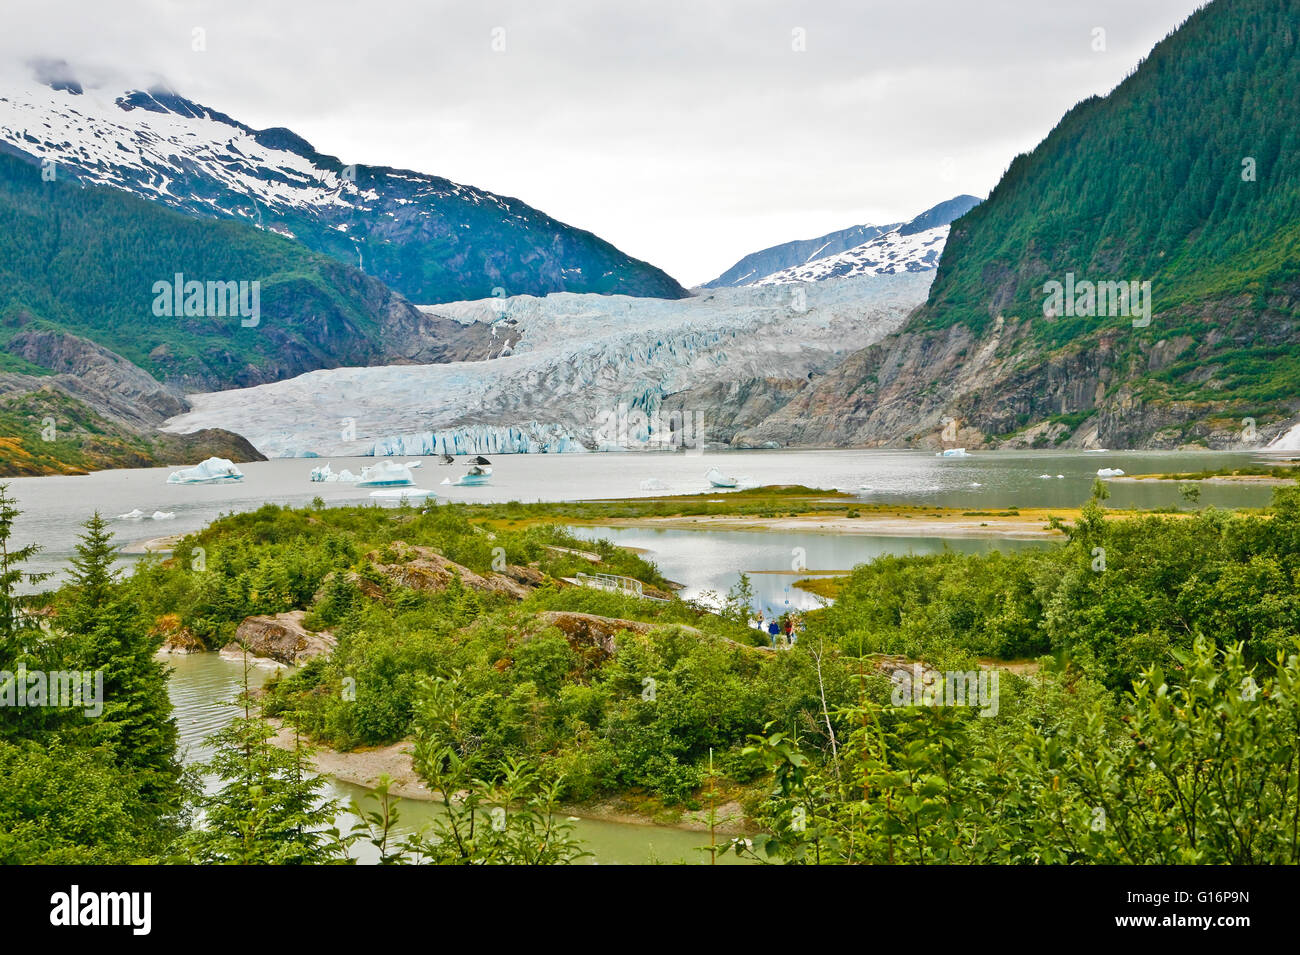 Mendenhall glacier, ice floes, and mountains near Juneau, AK.  It's about 12 miles (19 km) long and located in Mendenhall Valley Stock Photo